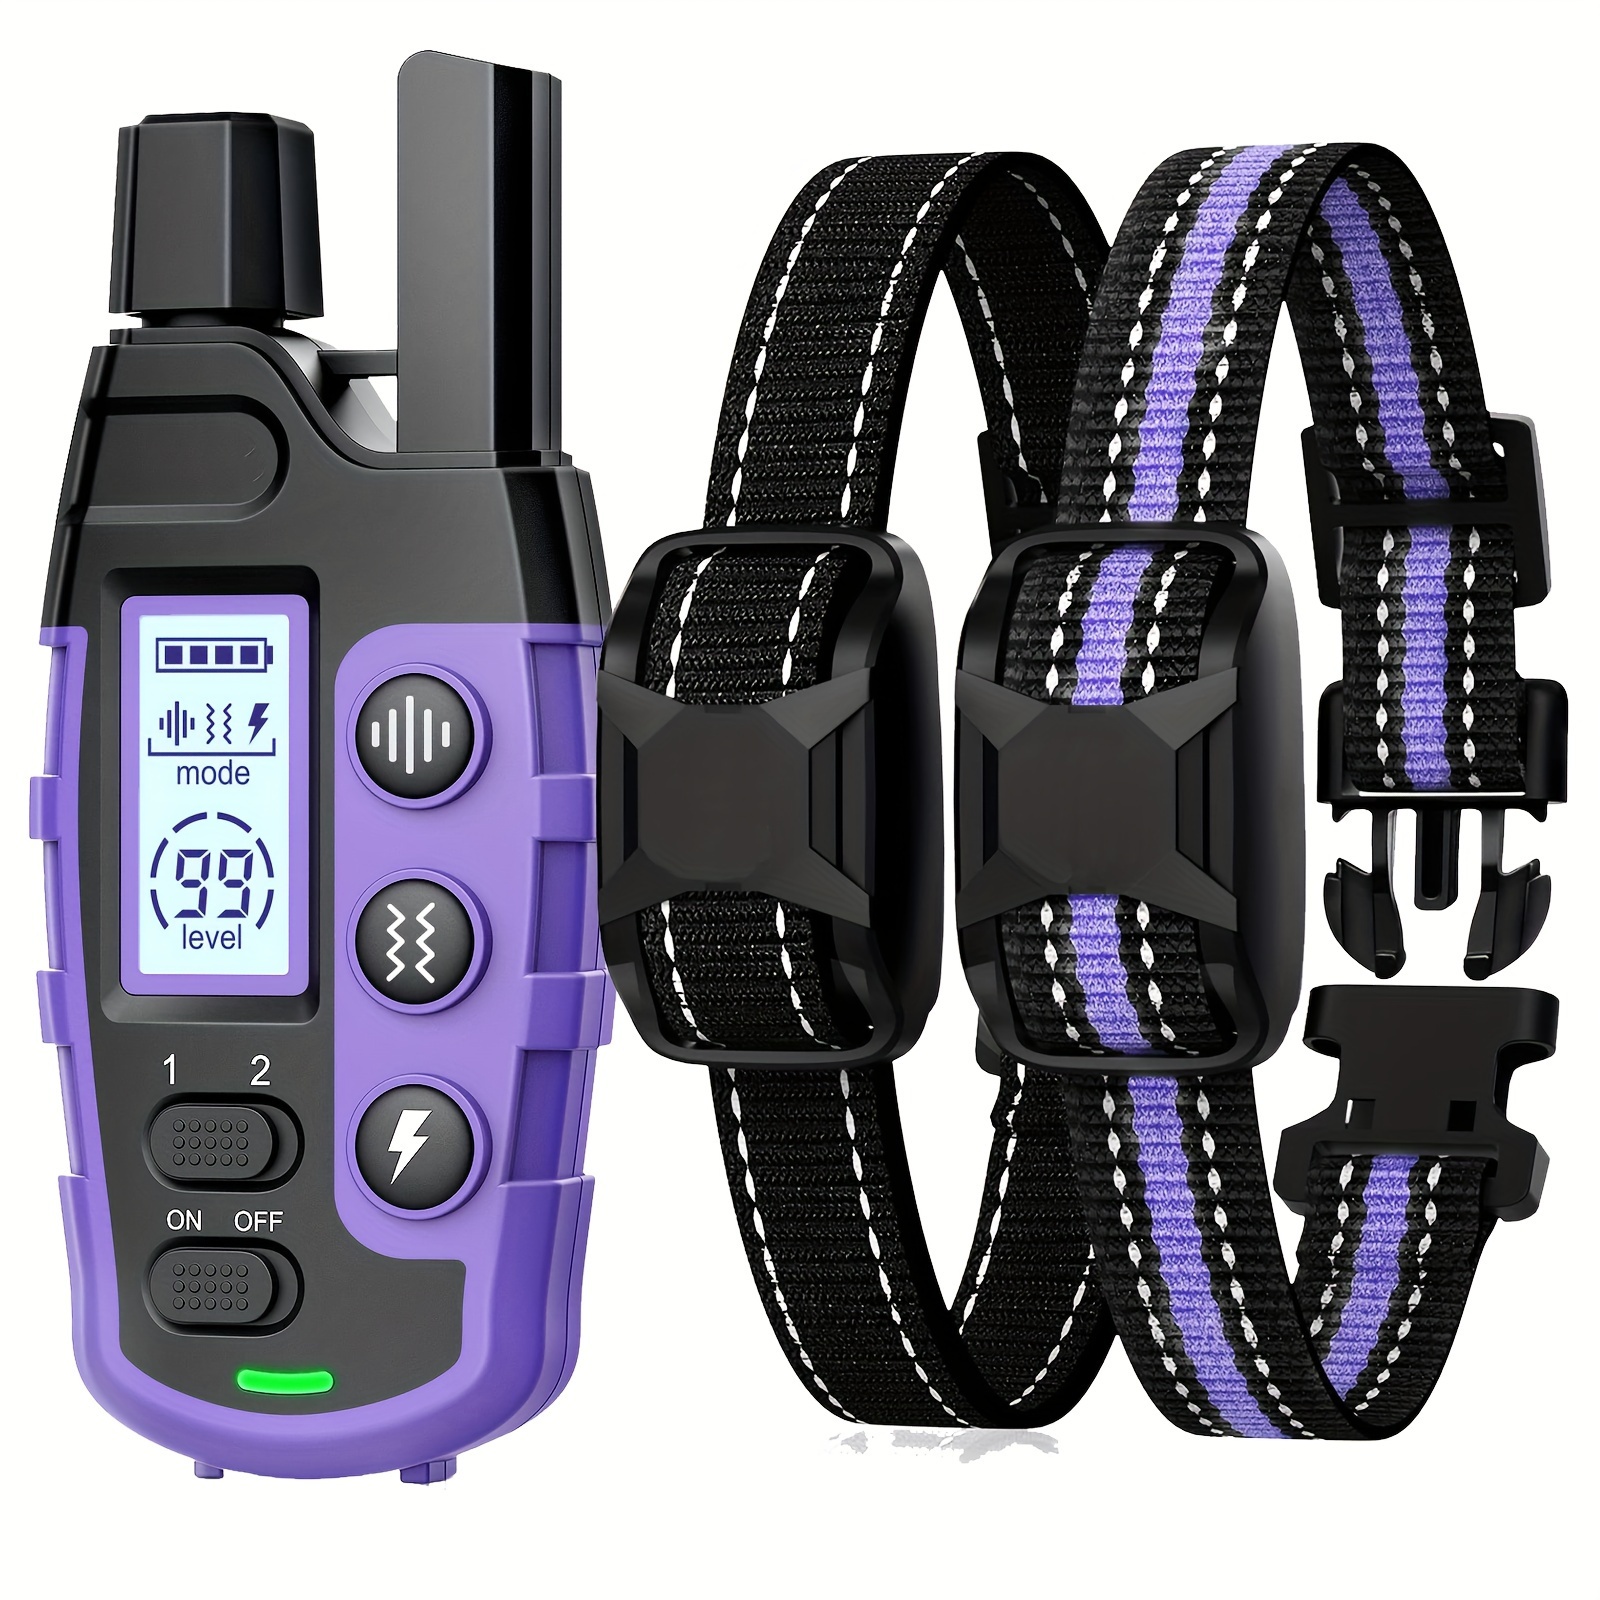 

3300ft Dog Training Collars With Remote, Adjustable Nylon Strap, Electric Shock, Vibration & Sound Modes, Rechargeable, 360ft Range, Waterproof, For Small To Large Dogs (5-150lbs)